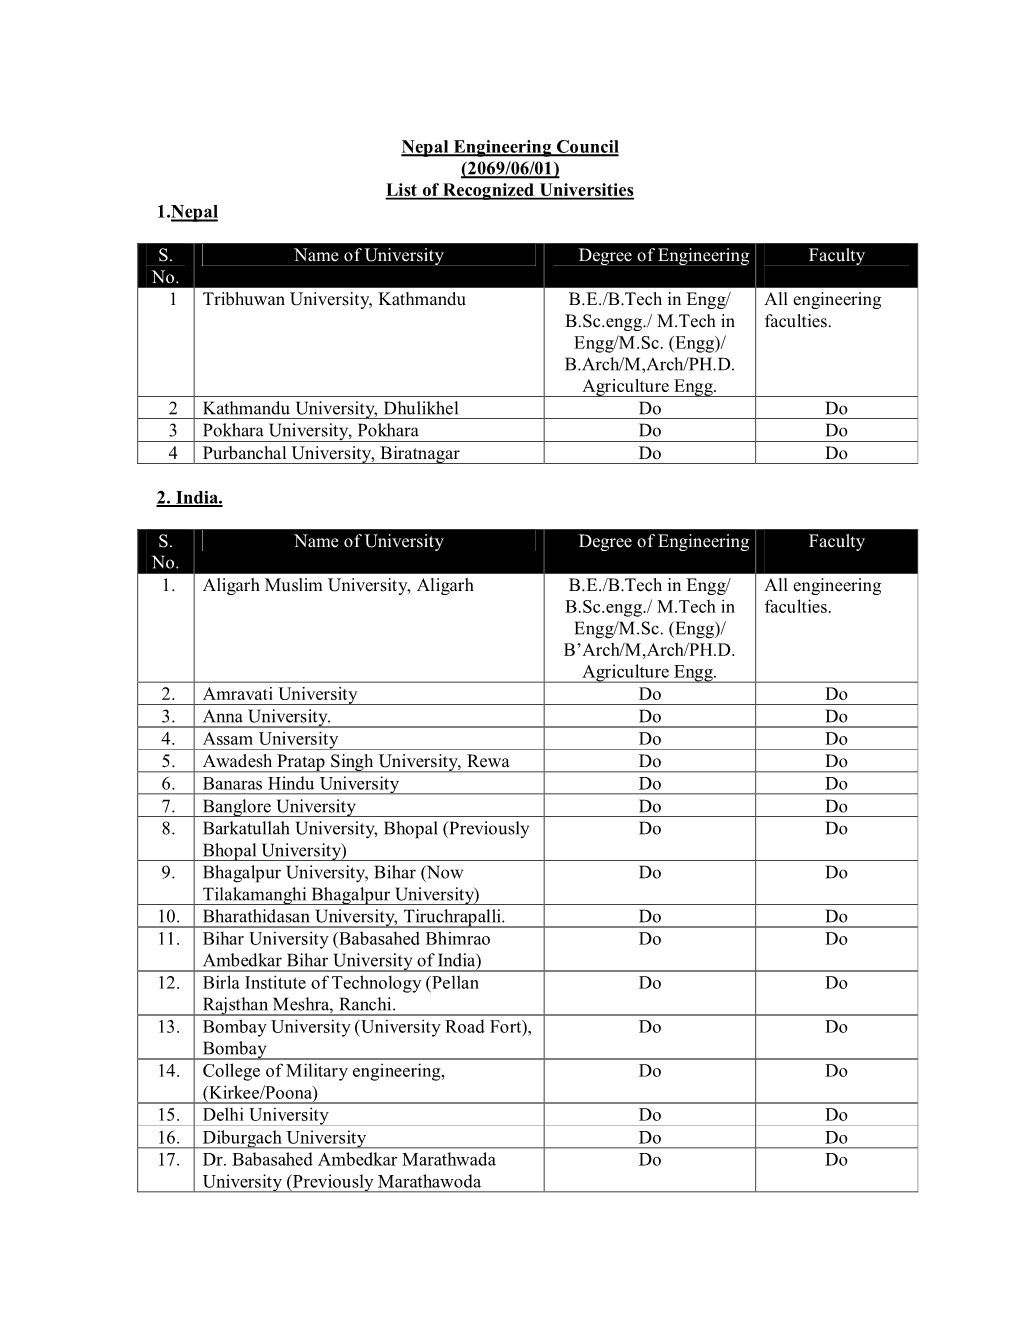 Nepal Engineering Council (2069/06/01) List of Recognized Universities 1.Nepal